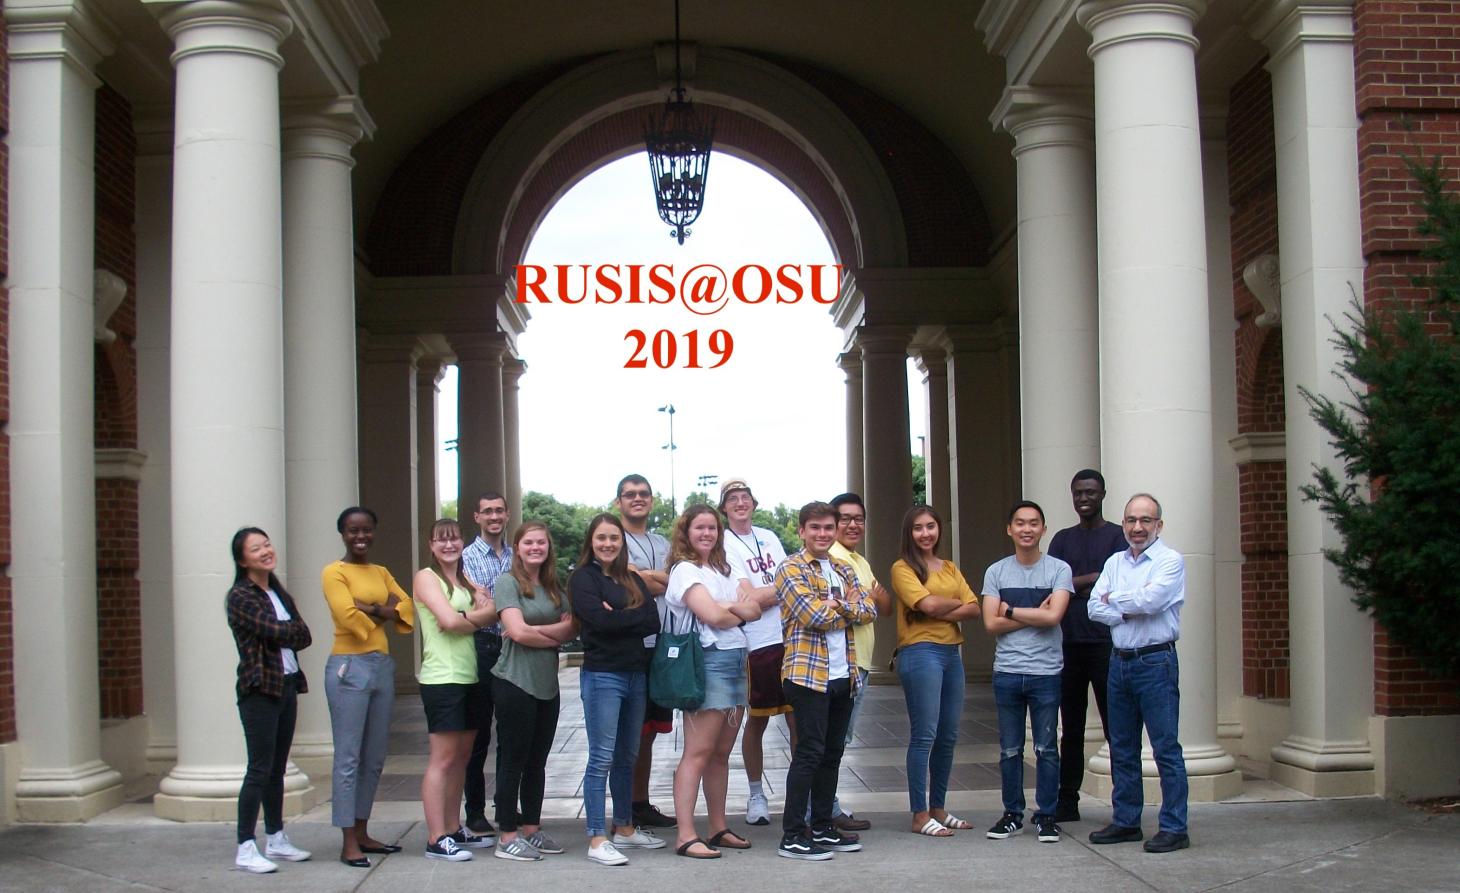 Members of RUSIS in 2019 standing together.